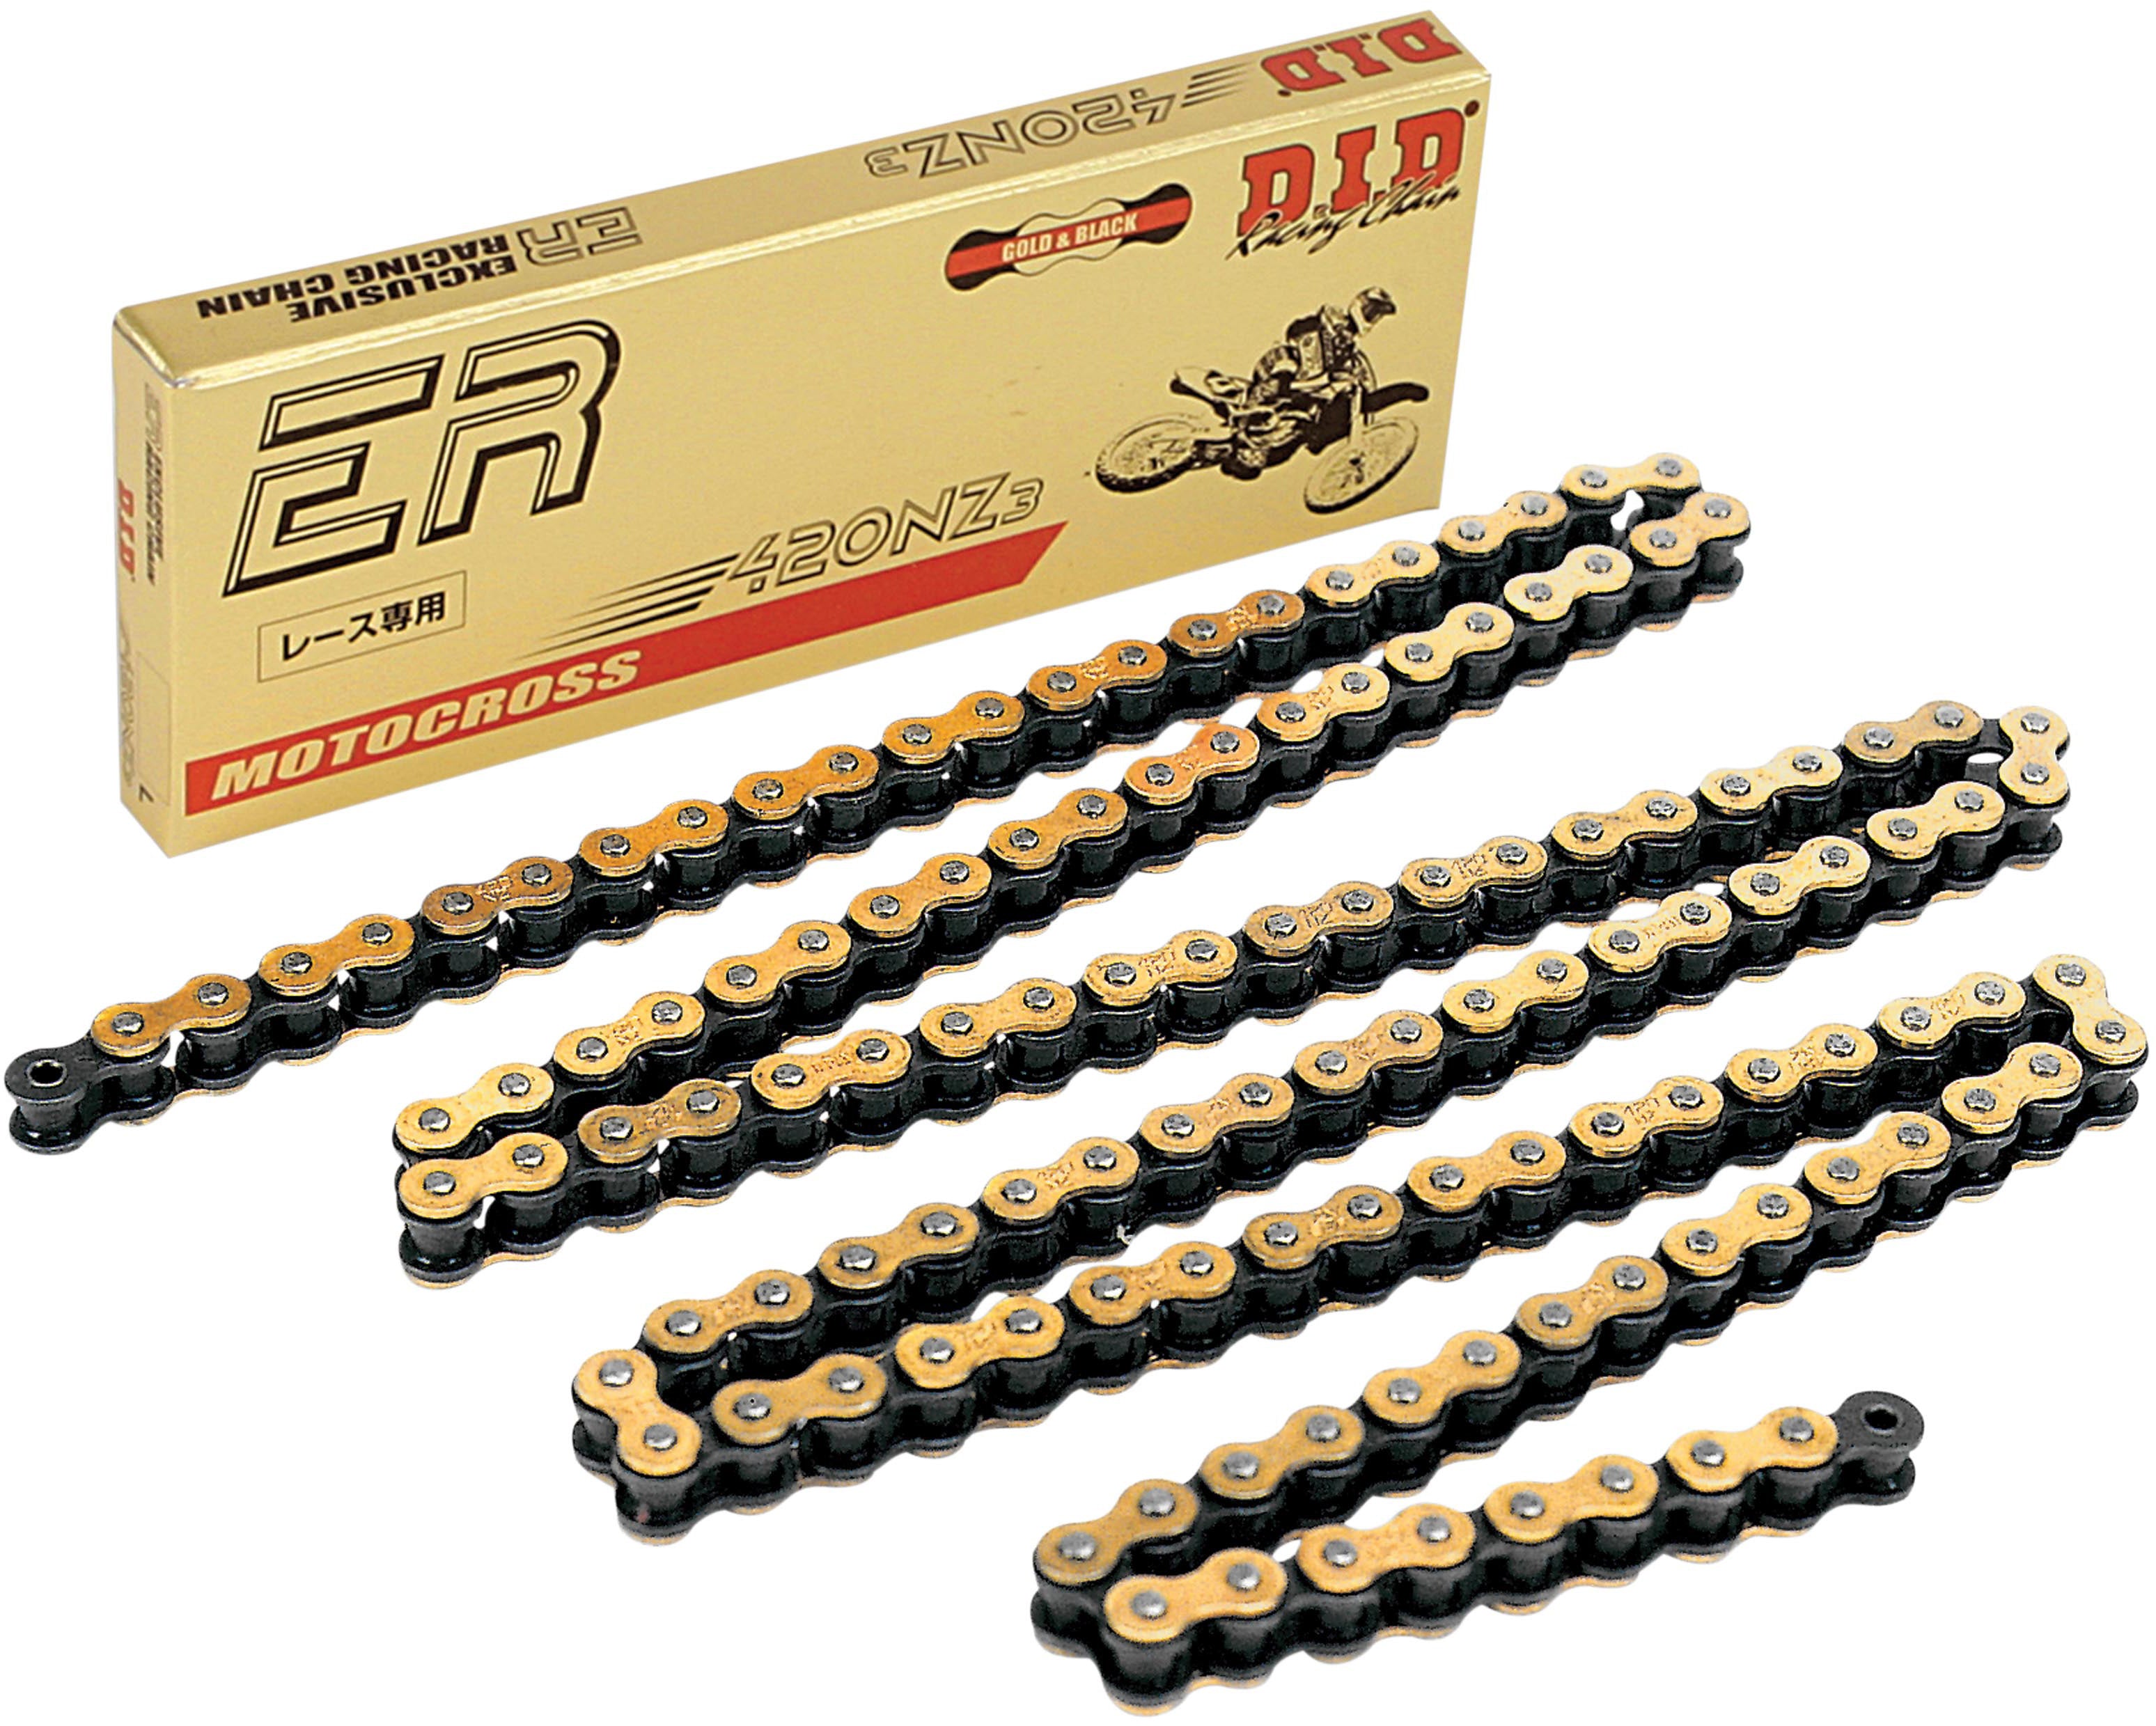 Gold and Black 420 NZ3 Motorcycle Chain with 134 Links on White Background